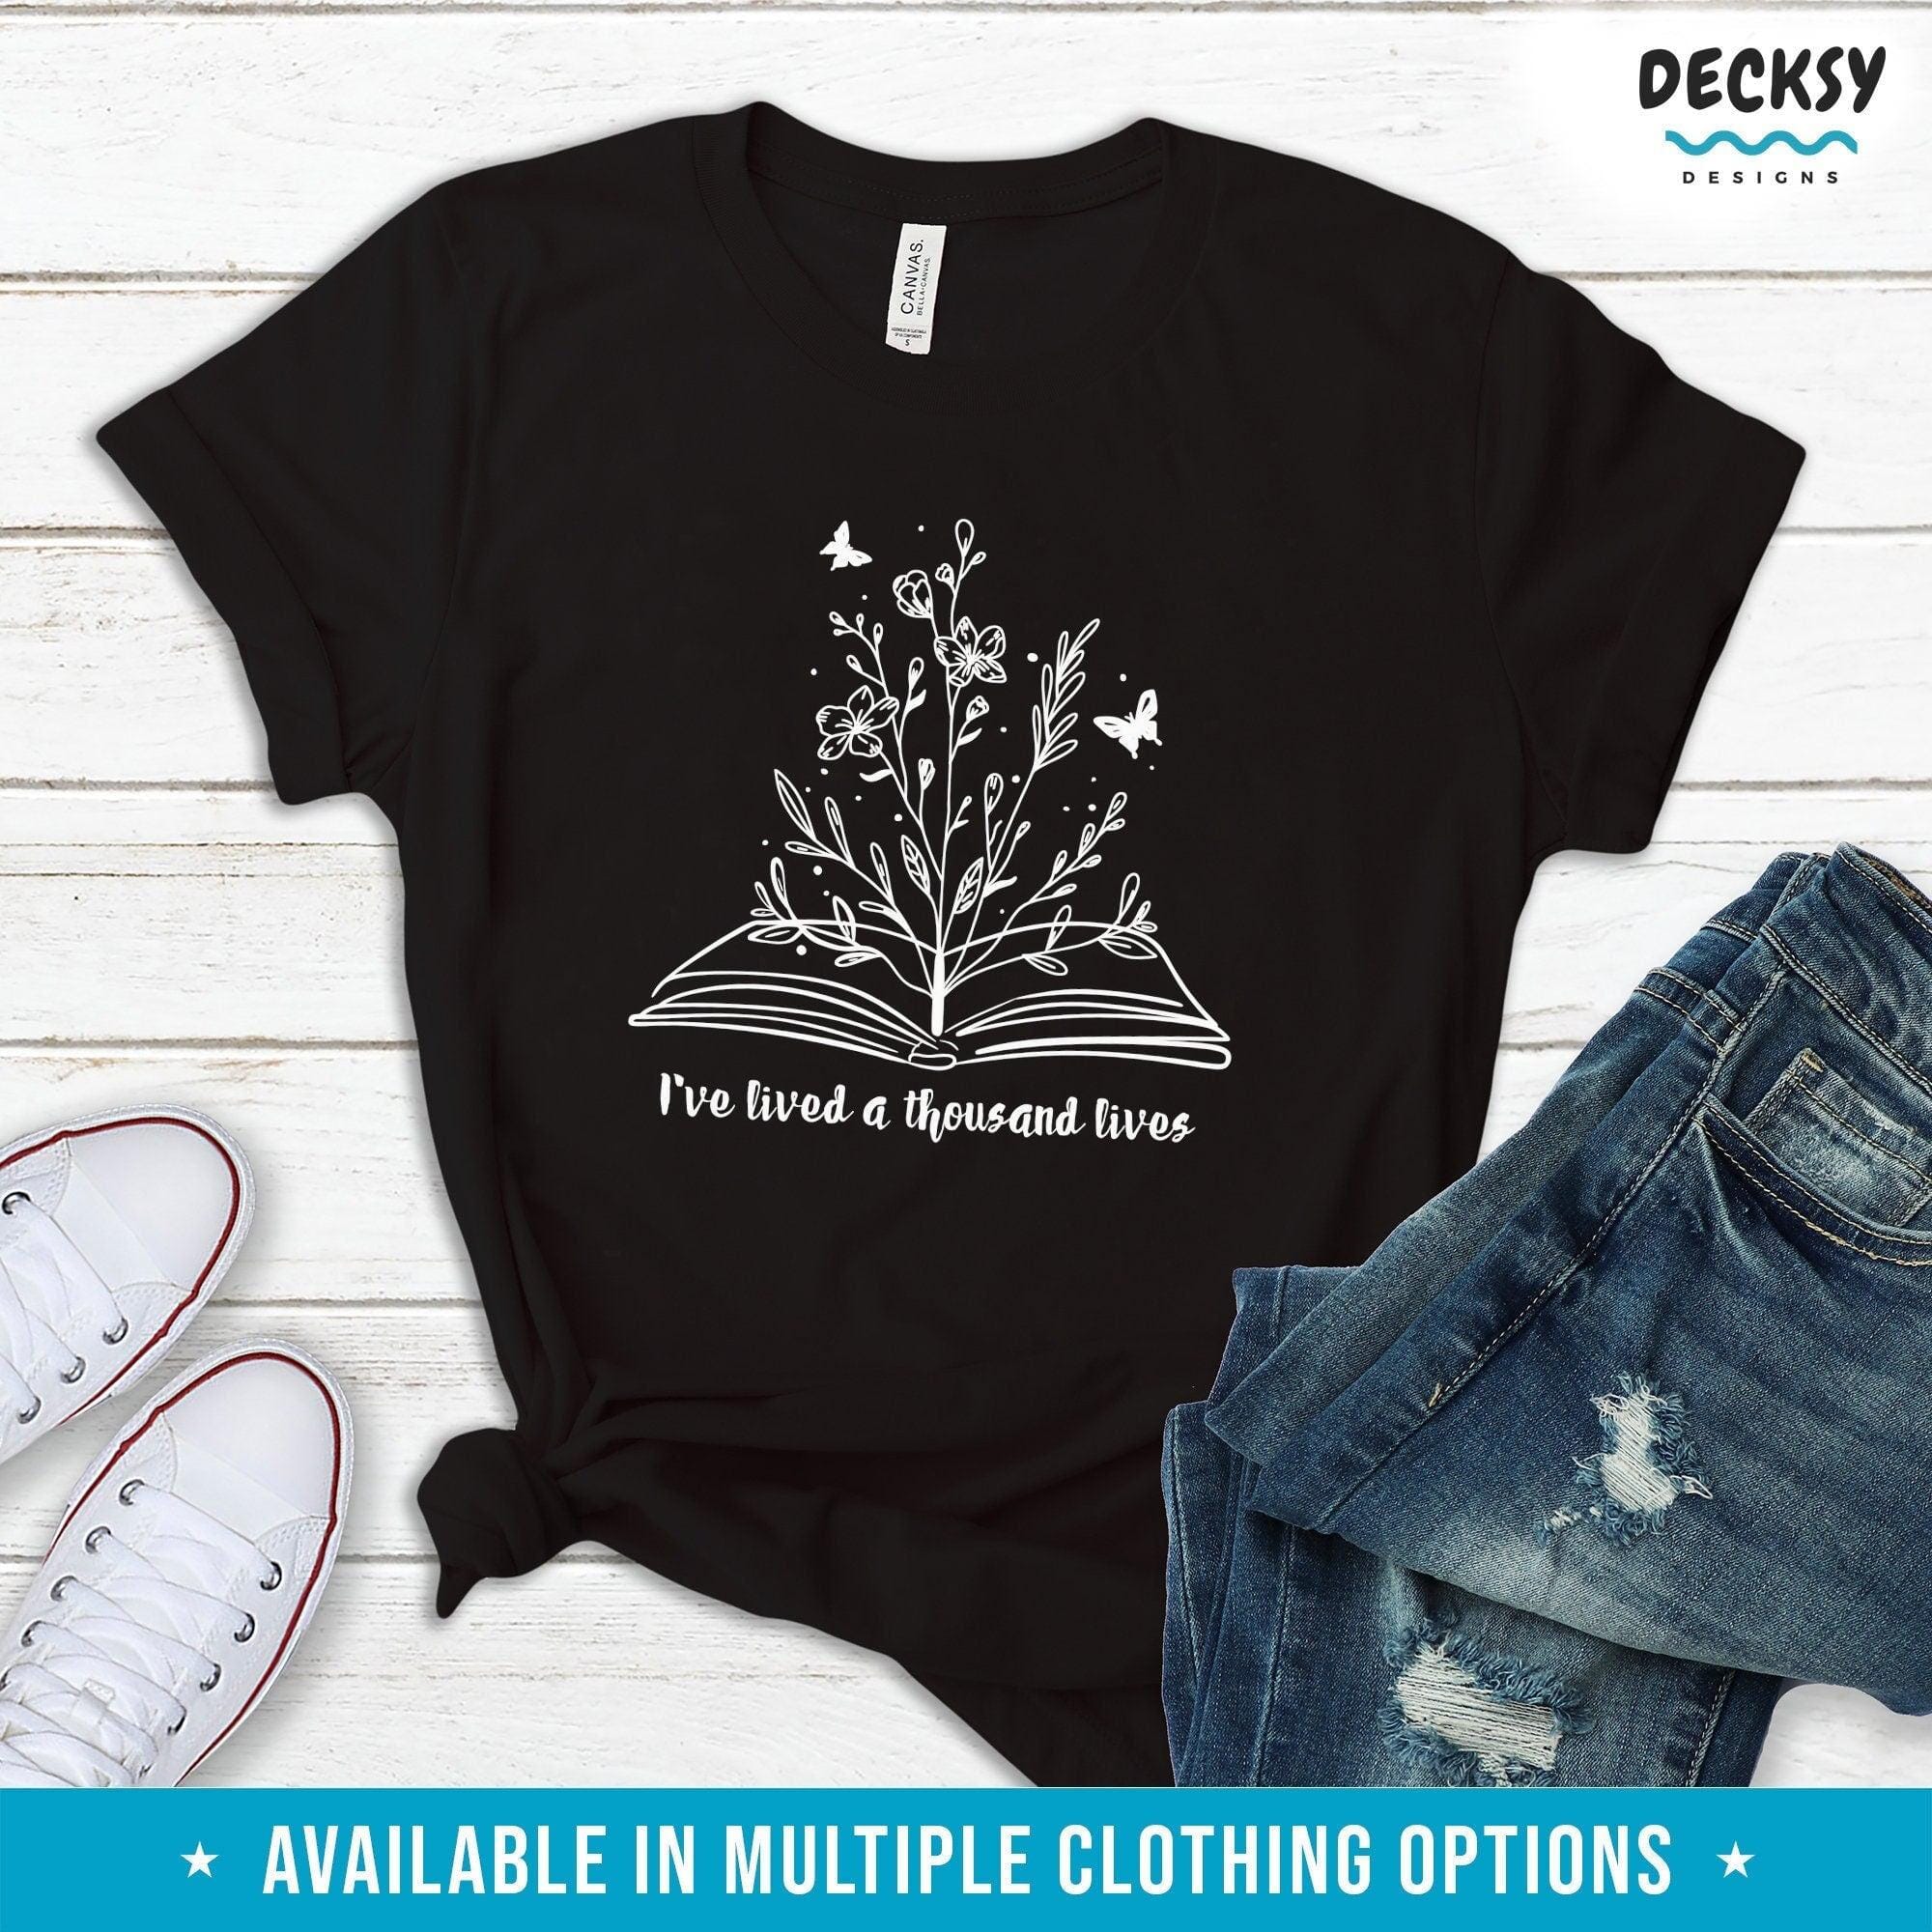 Book Lover Shirt, Gift for Reader-Clothing:Gender-Neutral Adult Clothing:Tops & Tees:T-shirts:Graphic Tees-DecksyDesigns